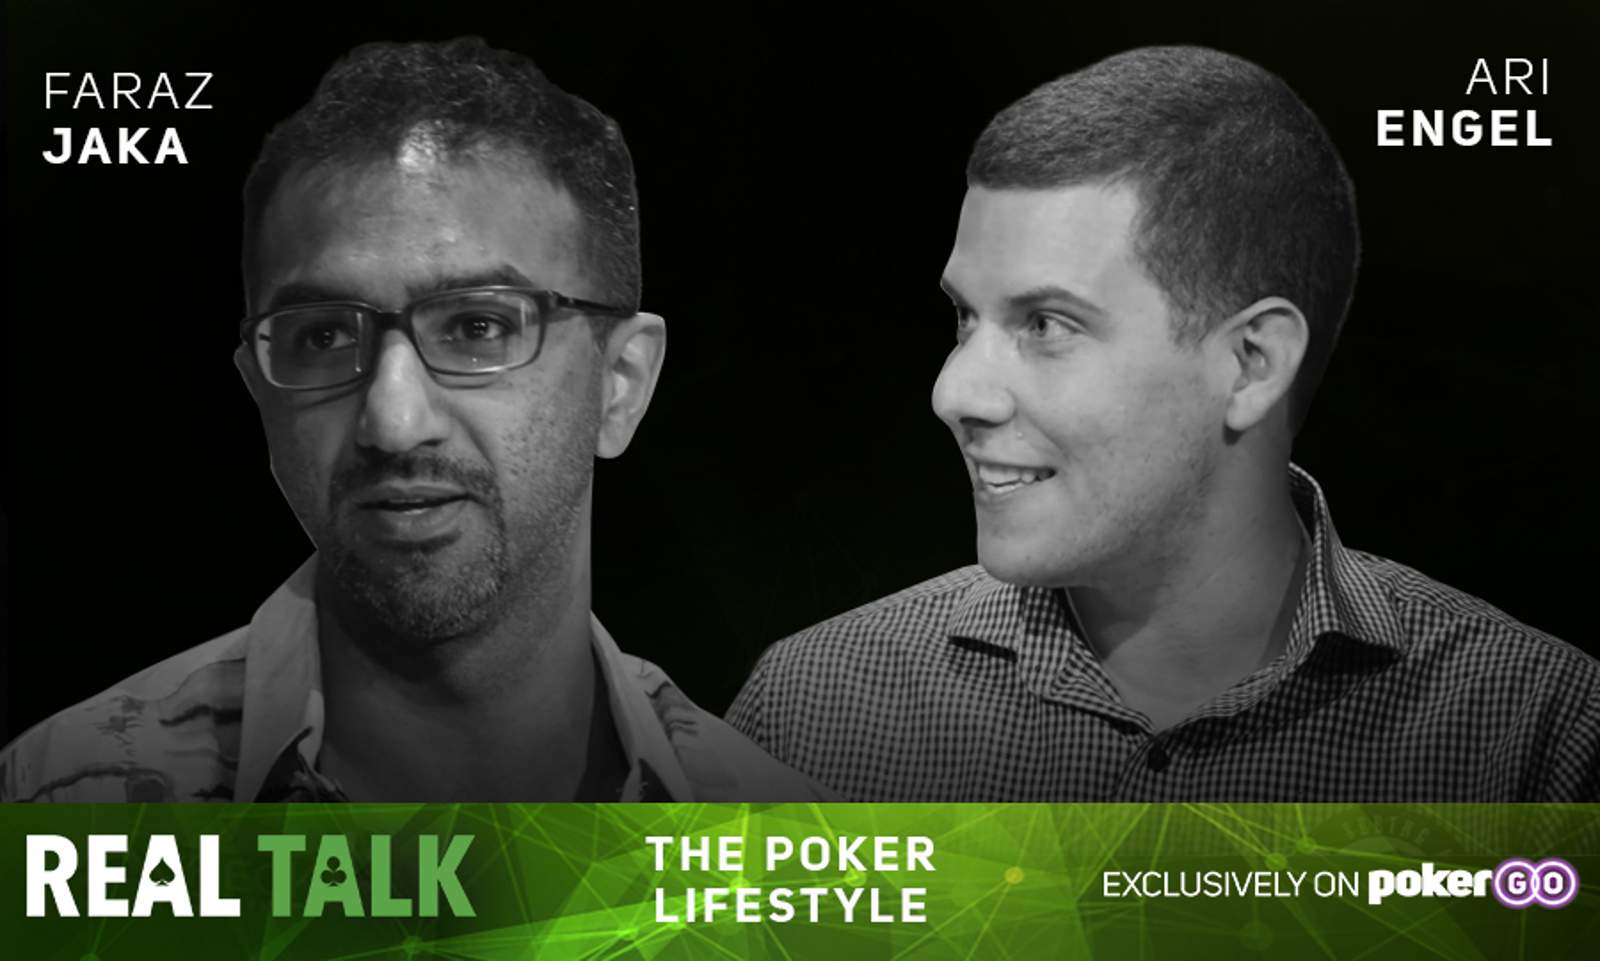 Real Talk – Different Poker Lifestyles: Jaka and Engel